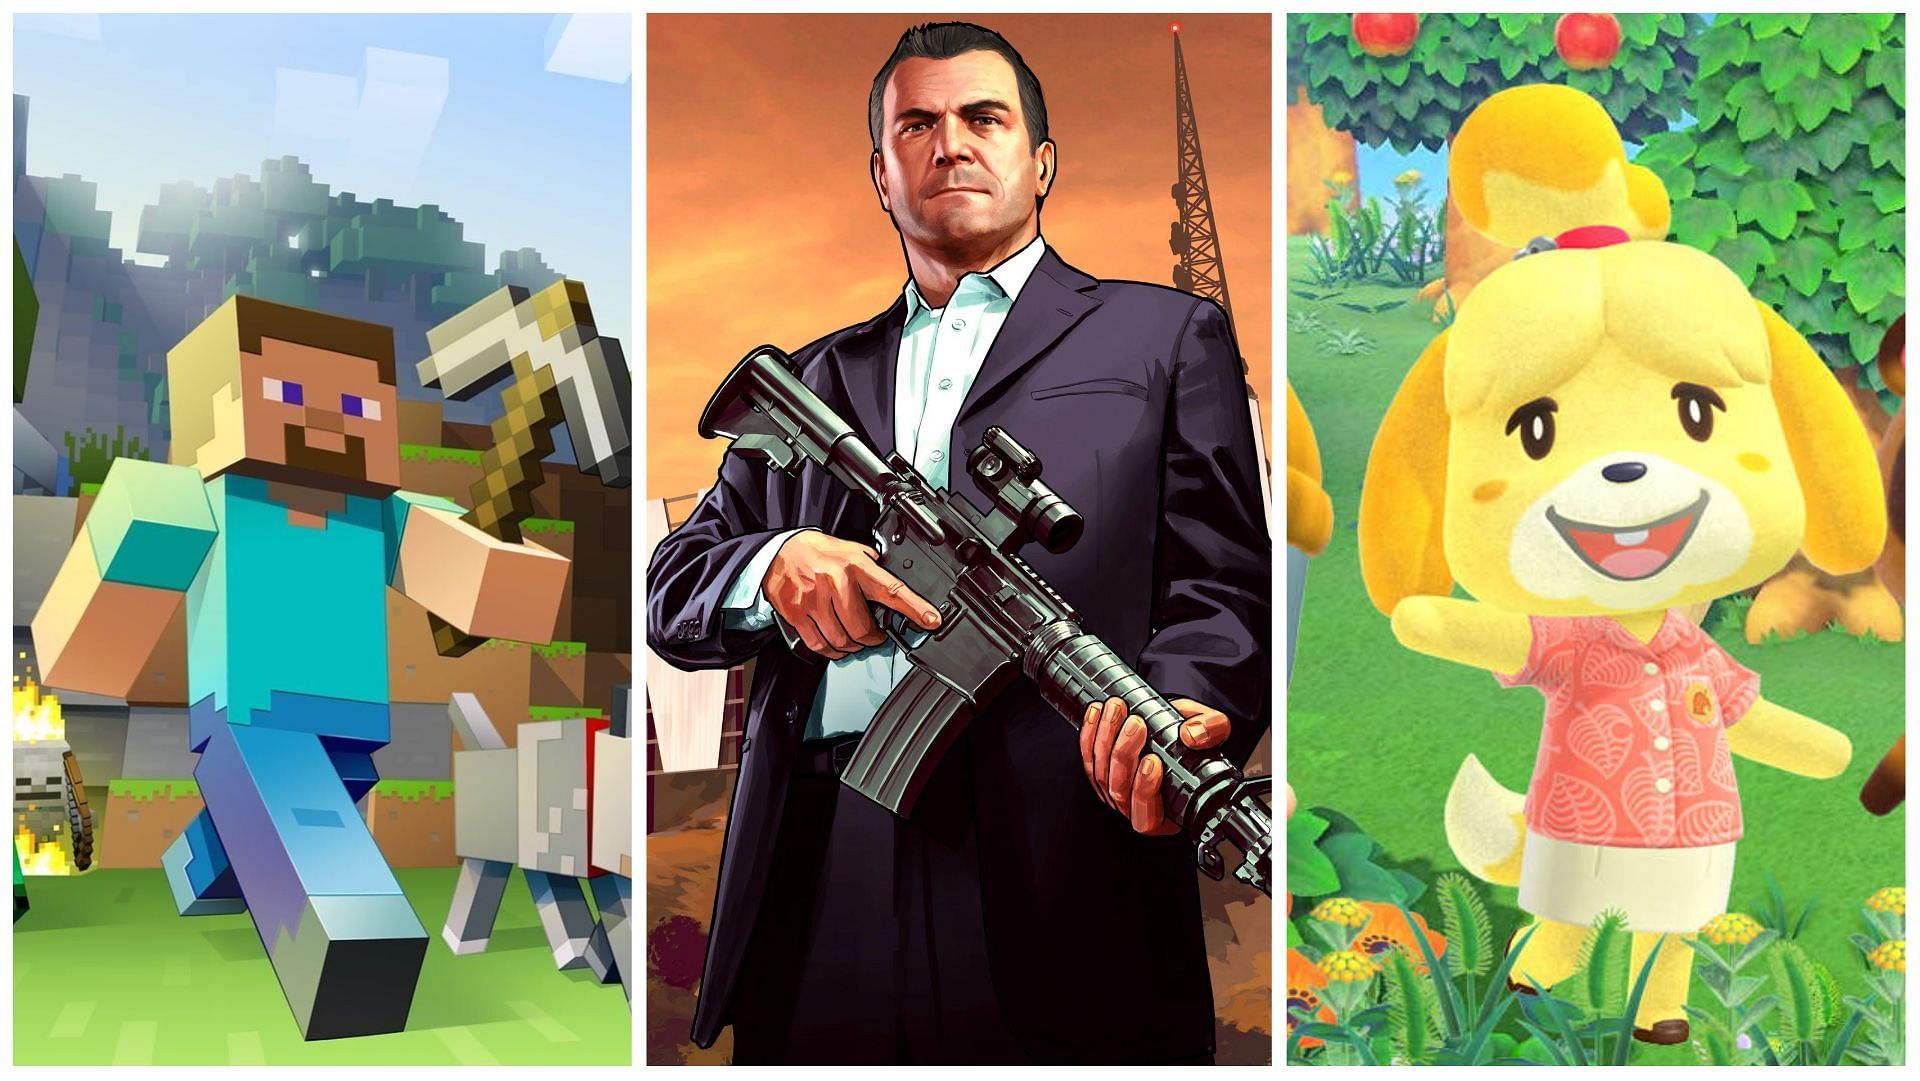 These video games provide players with endless hours of entertainment (Images via Mojang, Rockstar, and Nintendo)